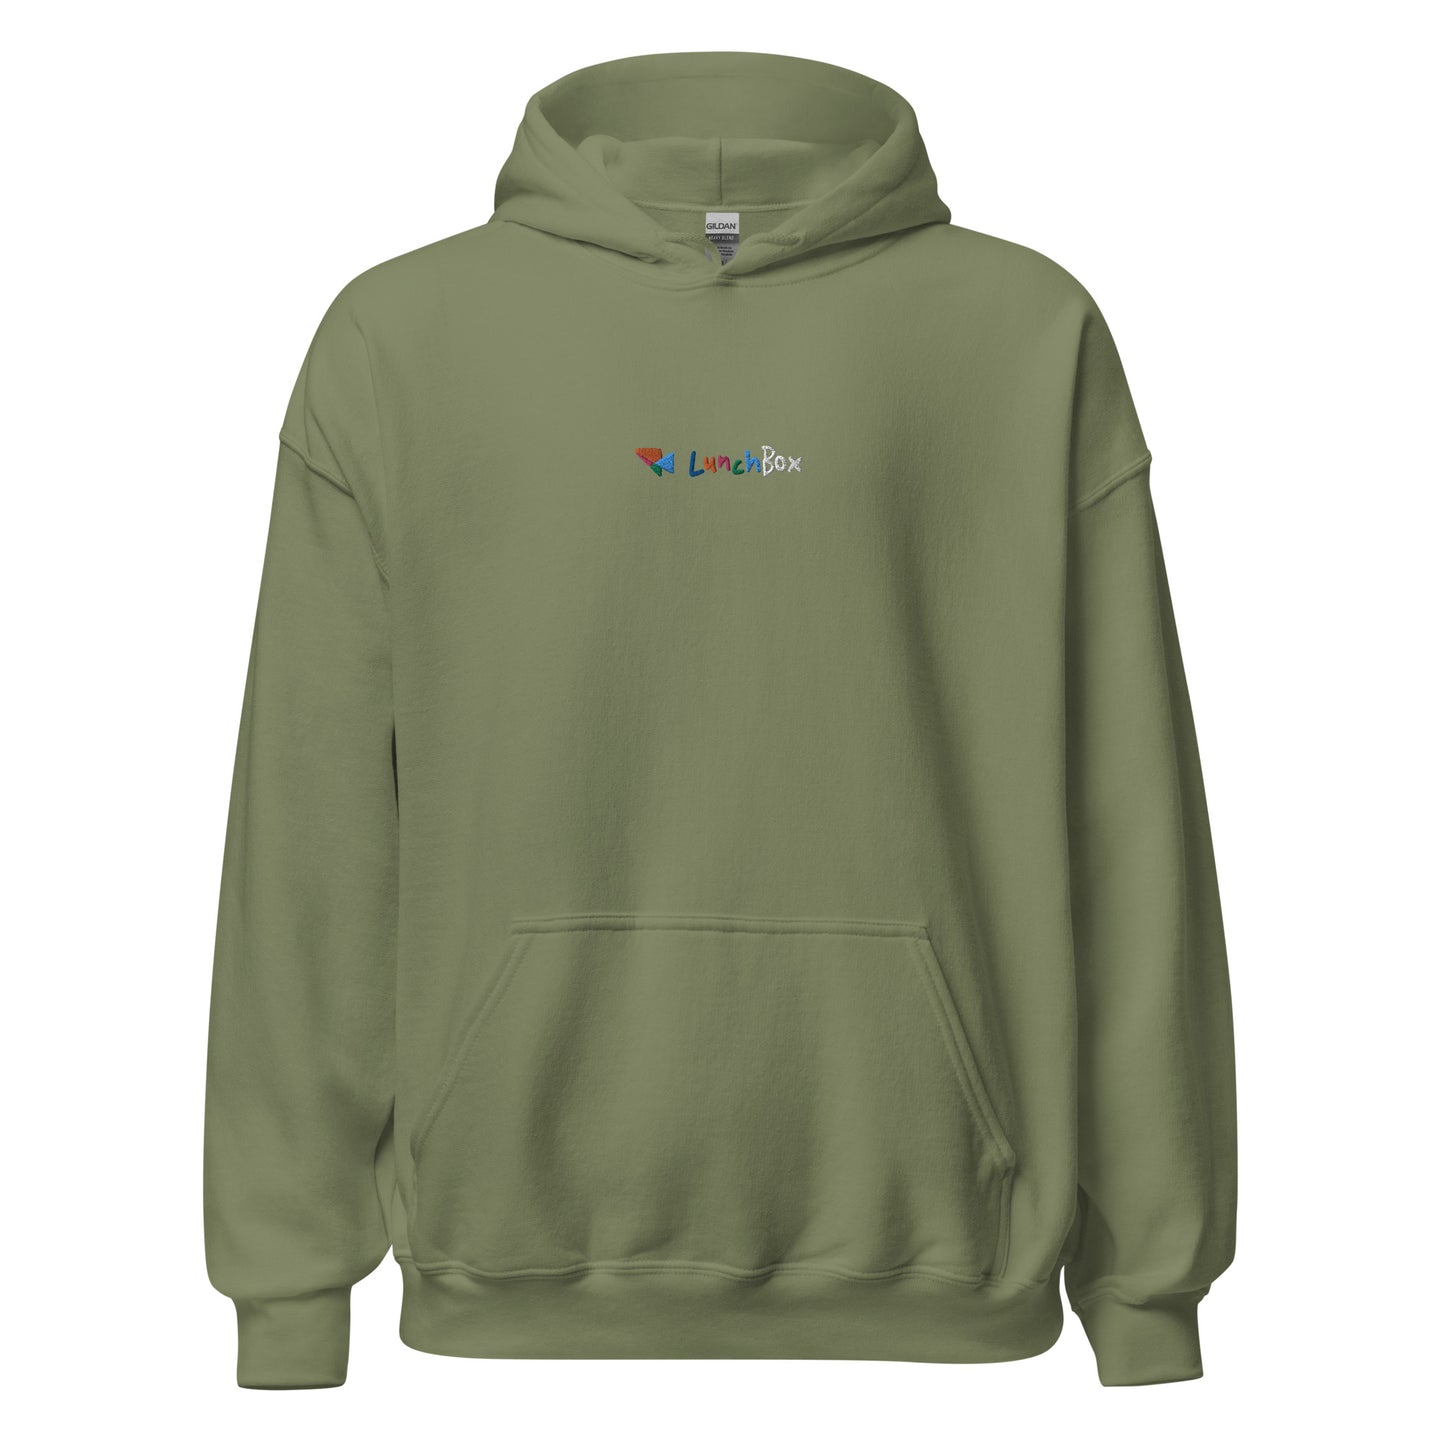 LunchBox Embroidered Hoodie